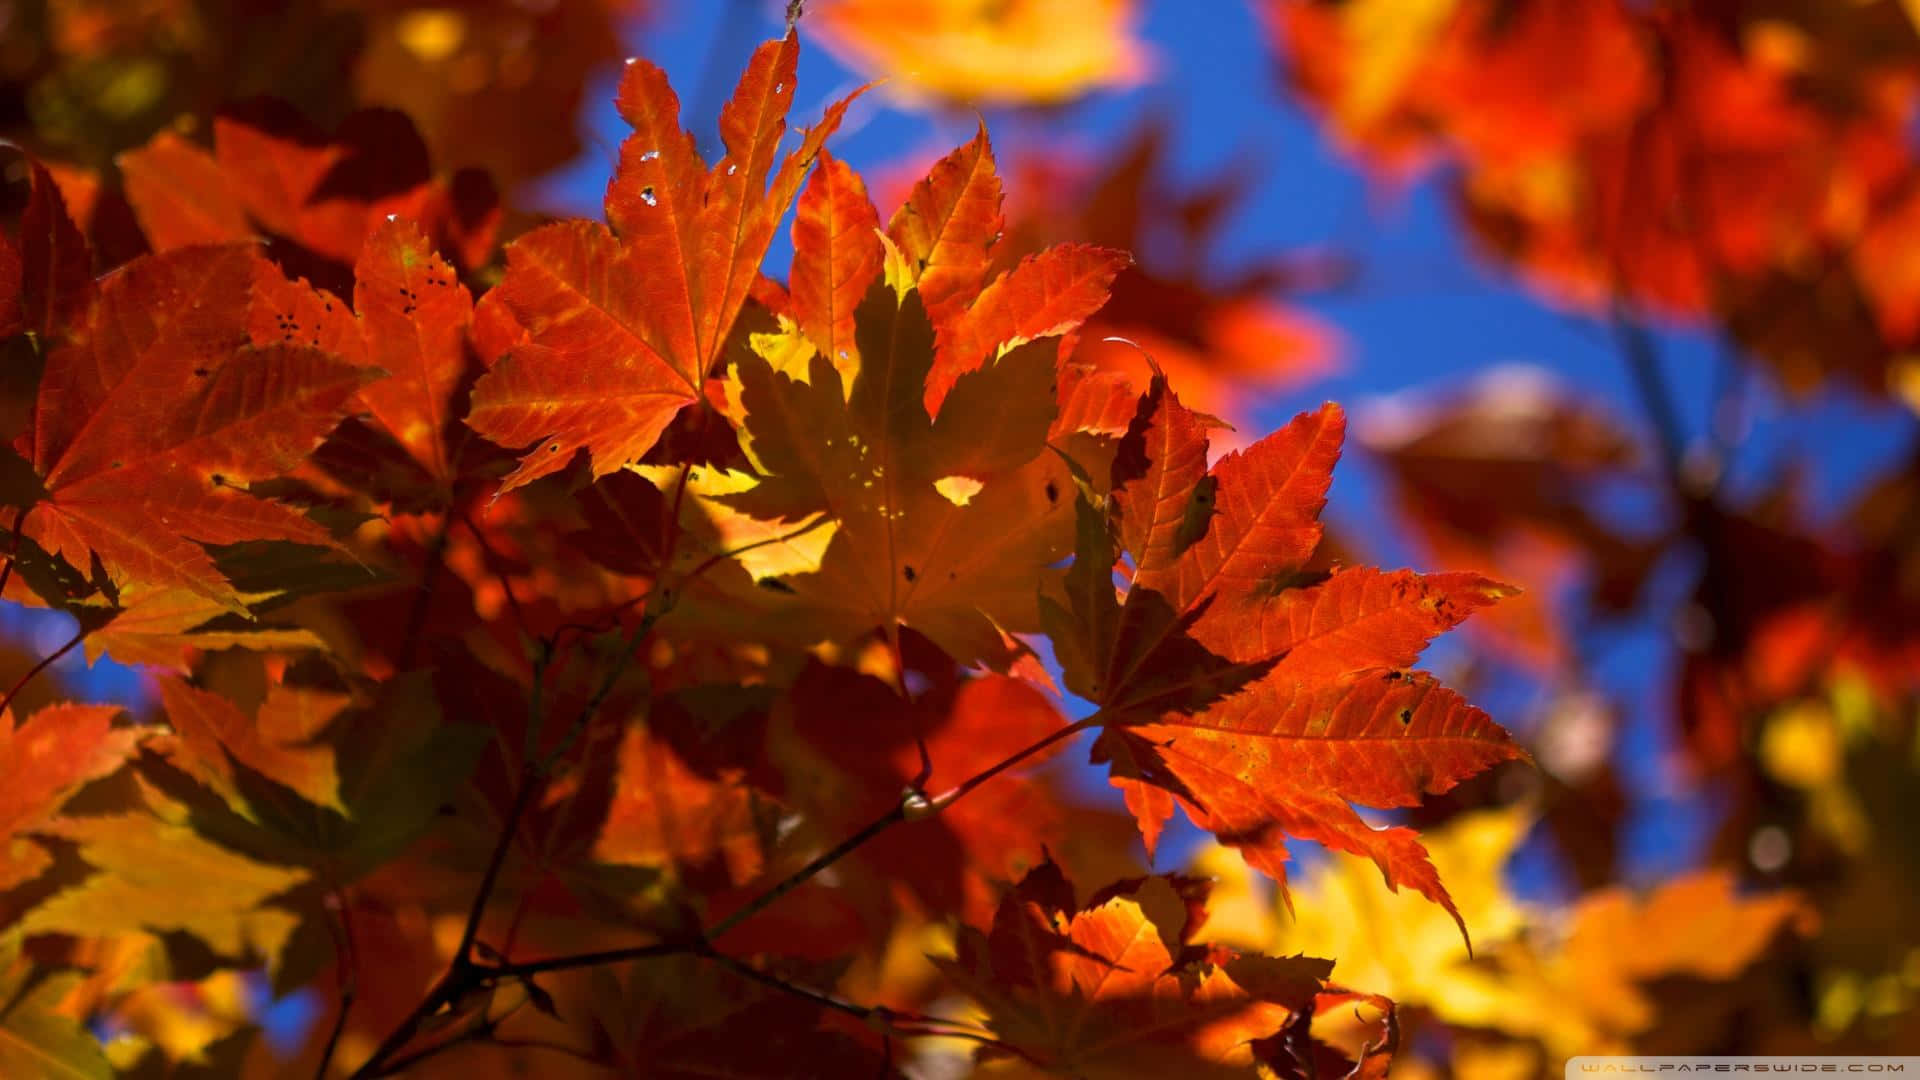 Enjoy the fall foliage with this laptop in hand. Wallpaper